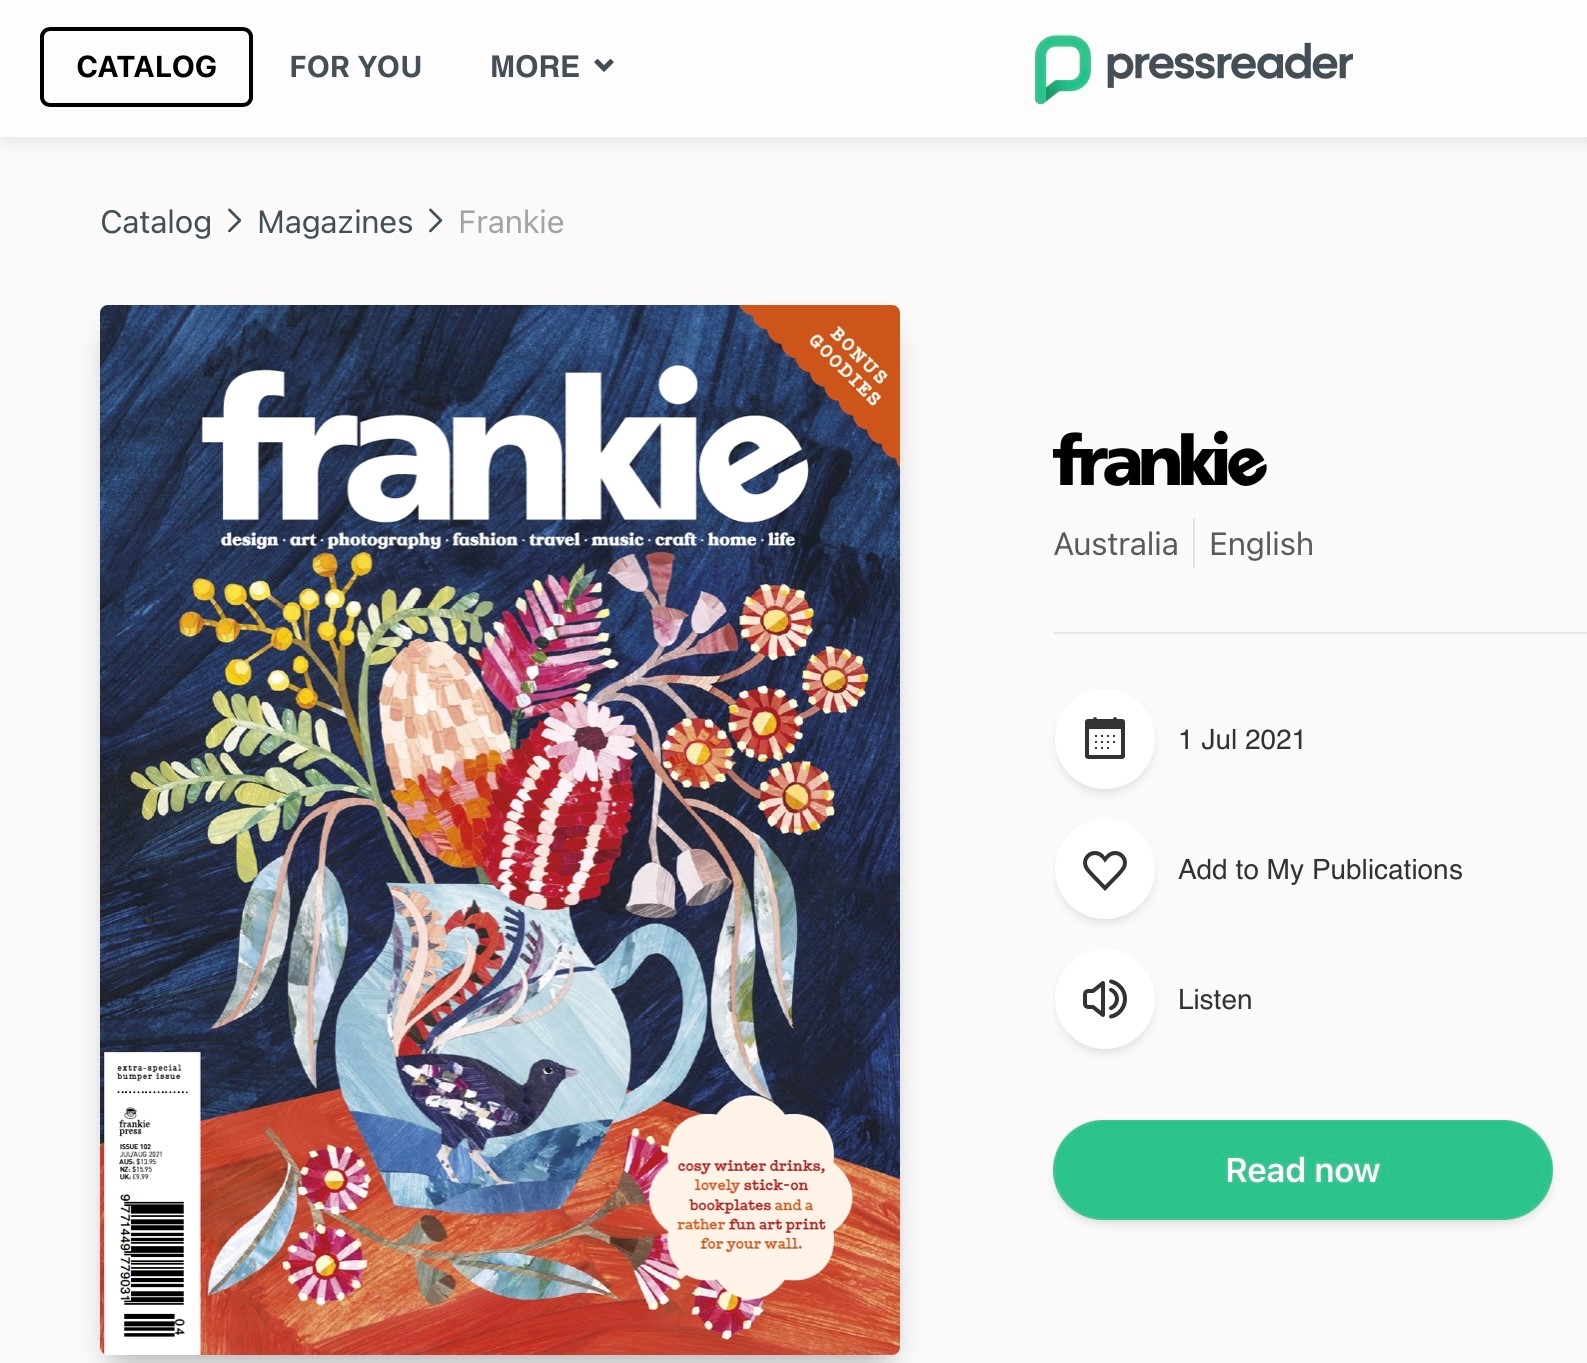 Front cover of magazine "Frankie"